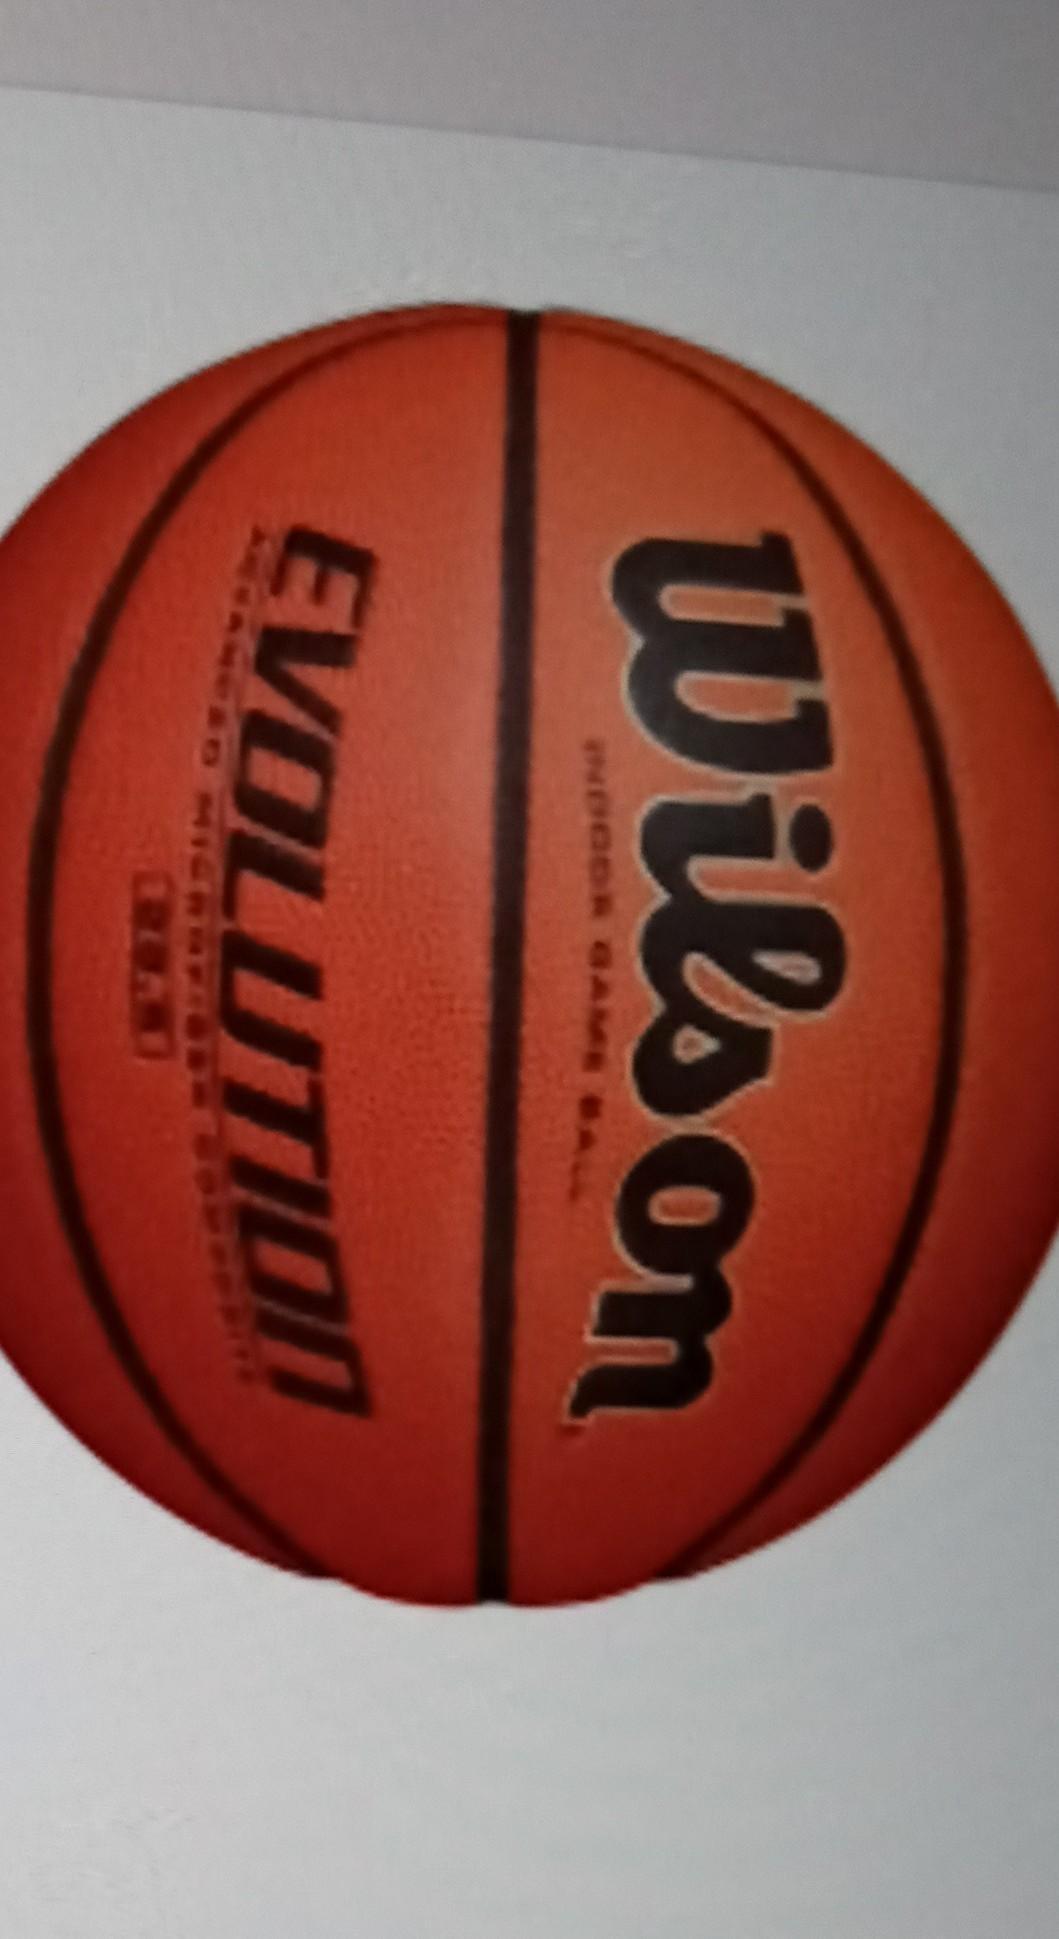 An Official Lady's Basketball Has A Circumference Of 28.5 Inches. How Much Volume Is Inside This Basketball?